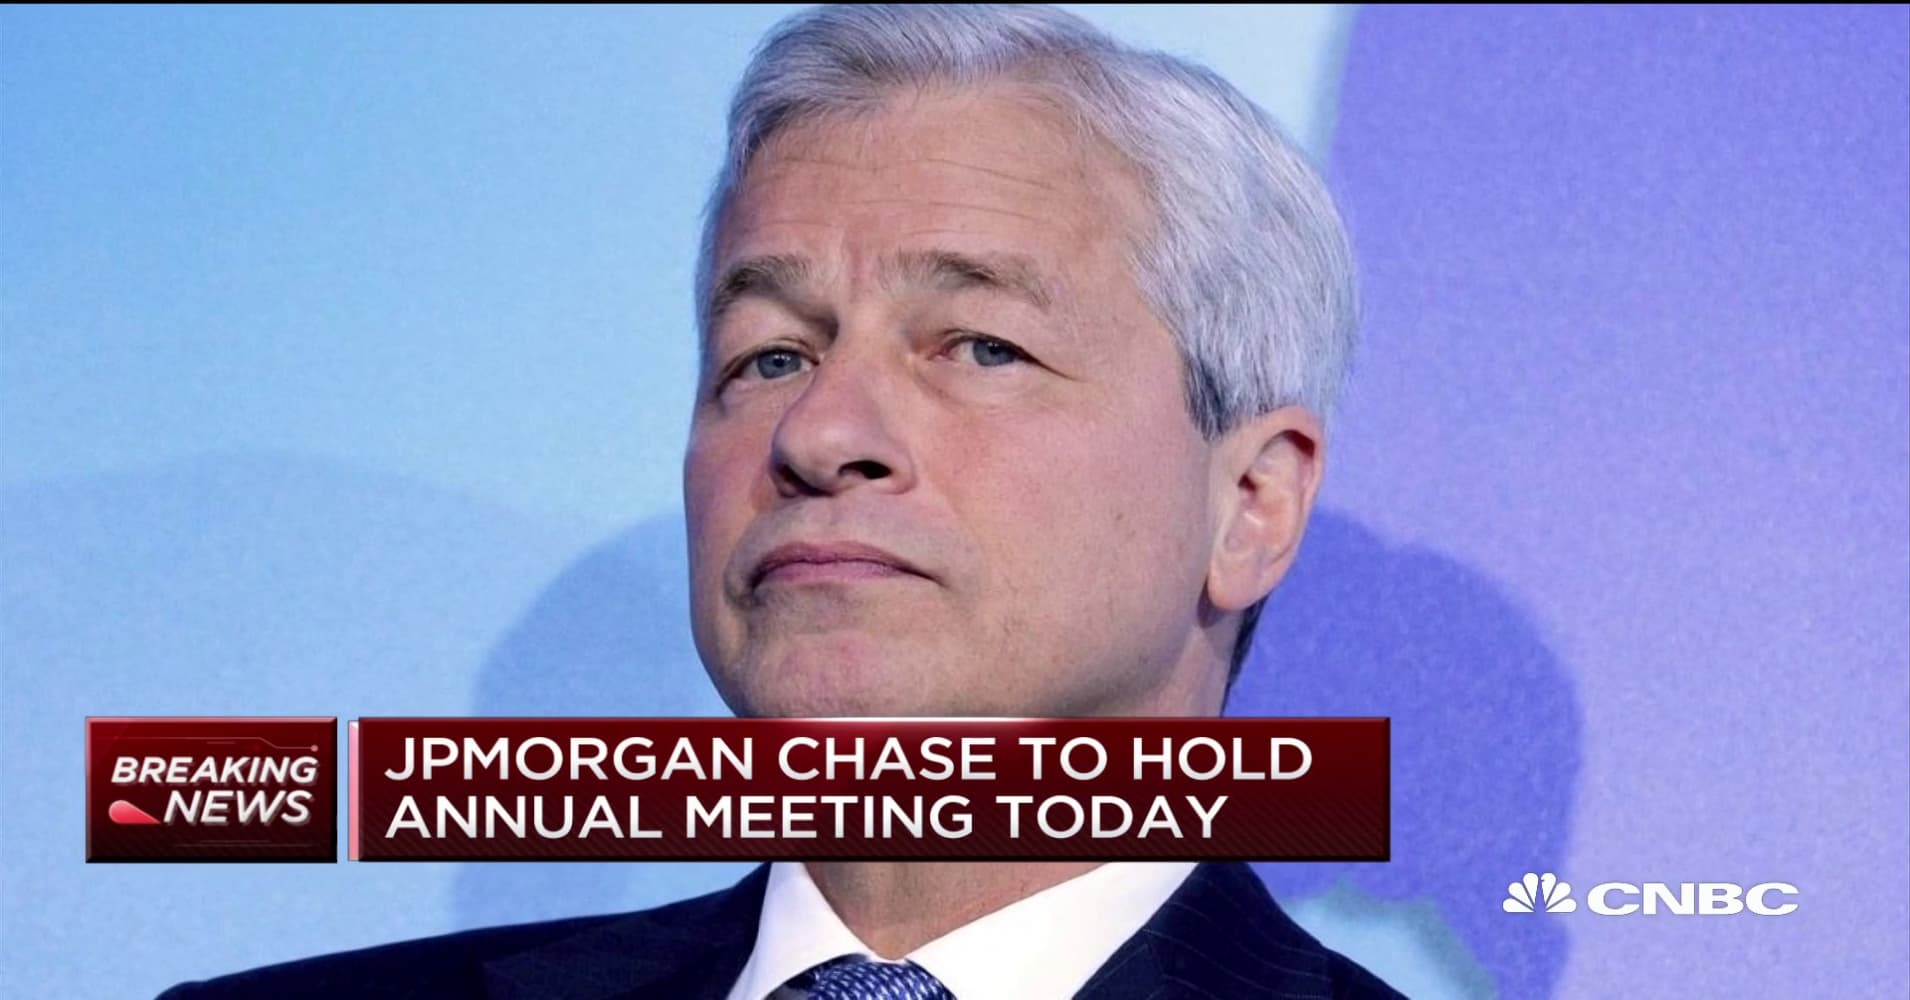 Here's what Jamie Dimon wrote in his annual letter to shareholders